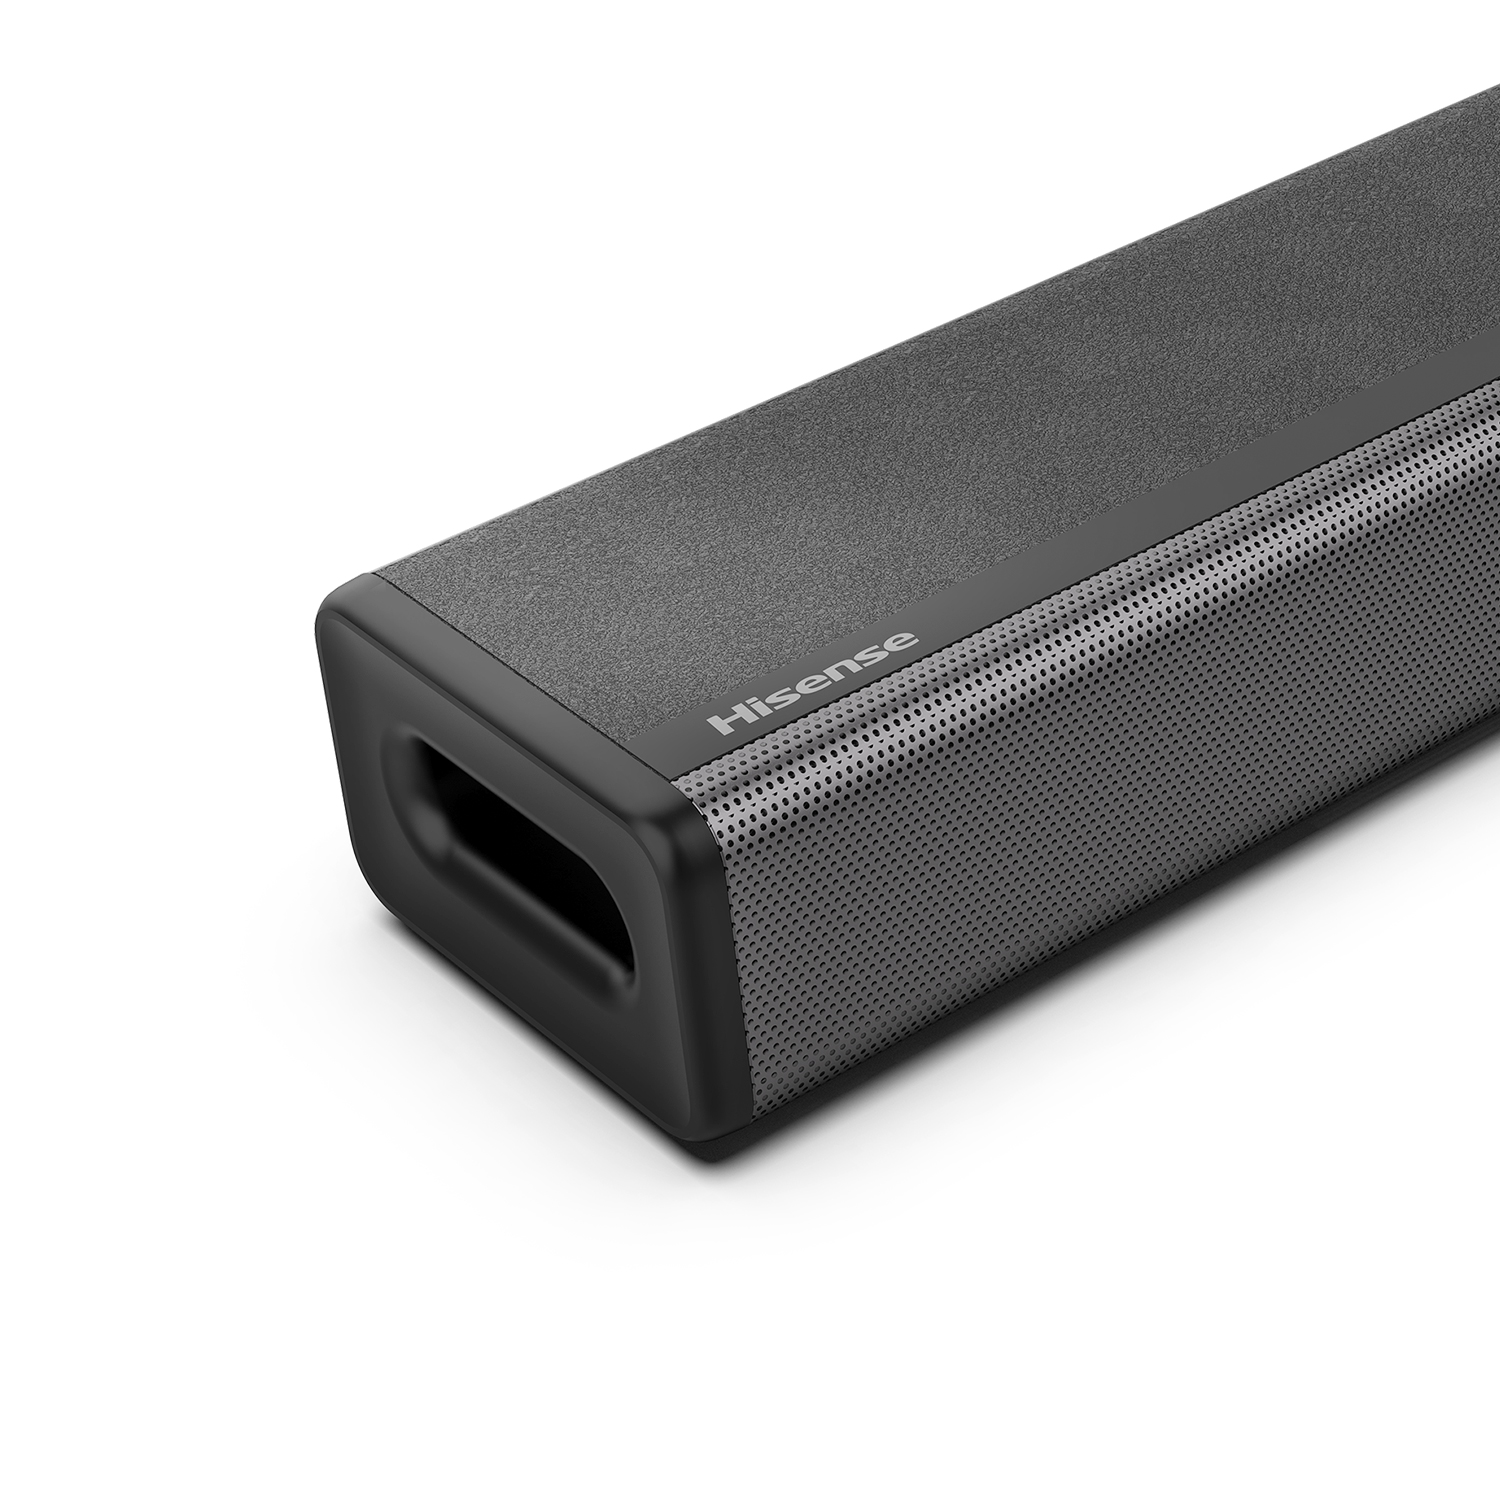 Hisense HS214 2.1 Channel Sound Bar with Built-in Subwoofer - image 5 of 15